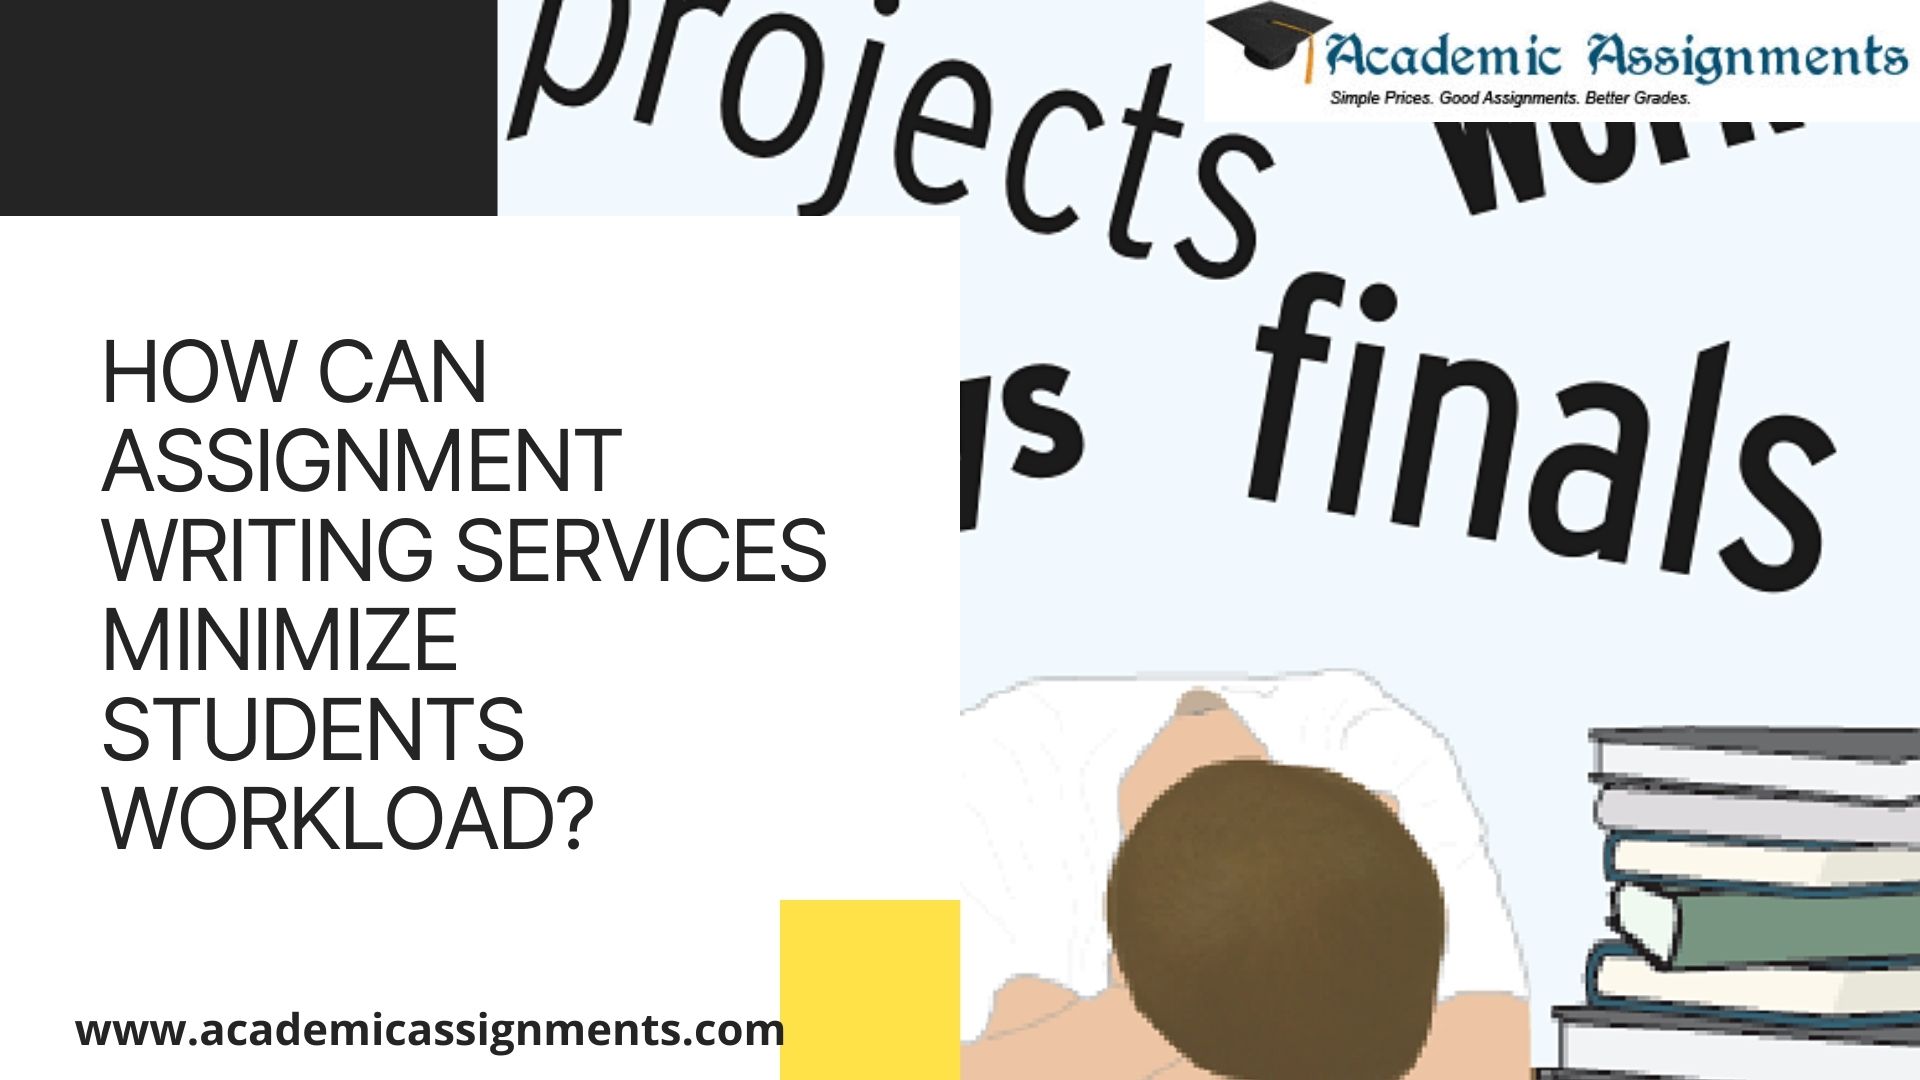 HOW CAN ASSIGNMENT WRITING SERVICES MINIMIZE STUDENTS WORKLOAD